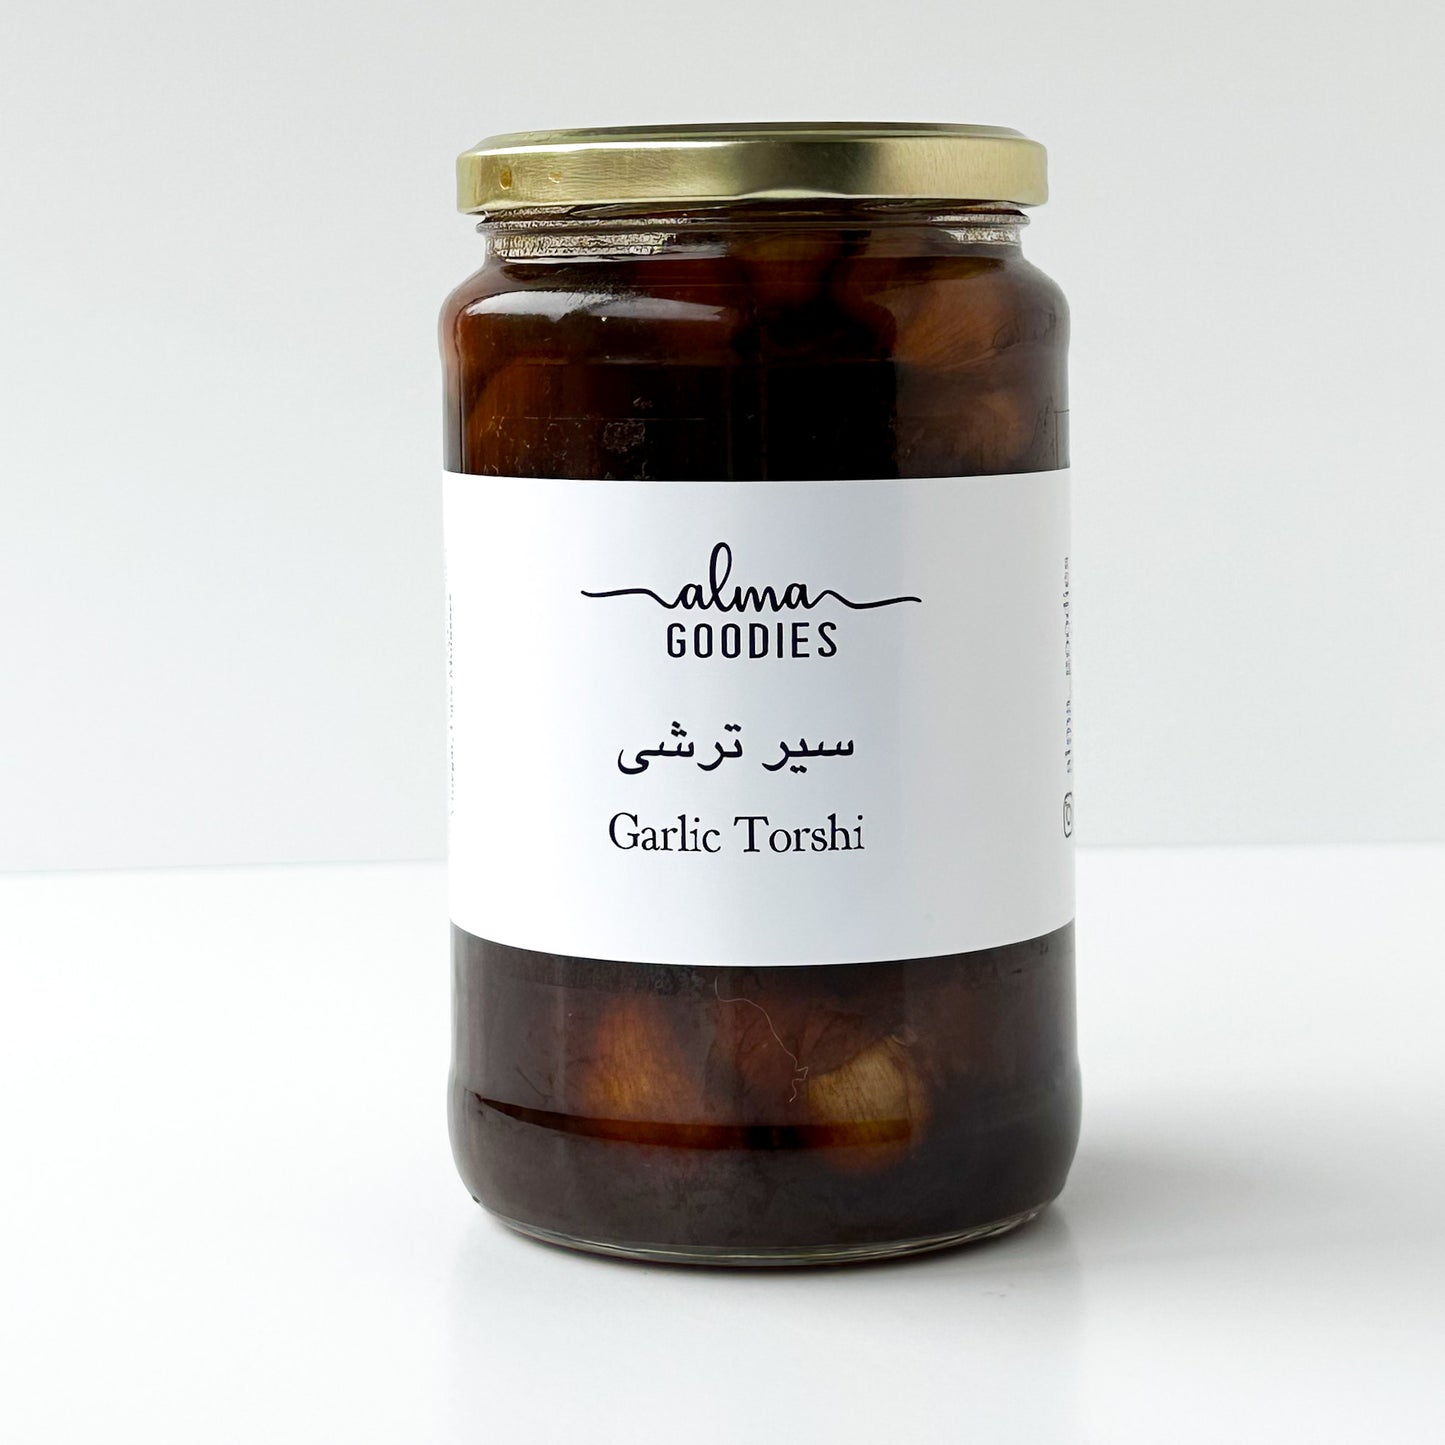 Garlic Torshi (Pickled Garlic) - The Zesty and Flavorful Pickled Delight (750 grams)